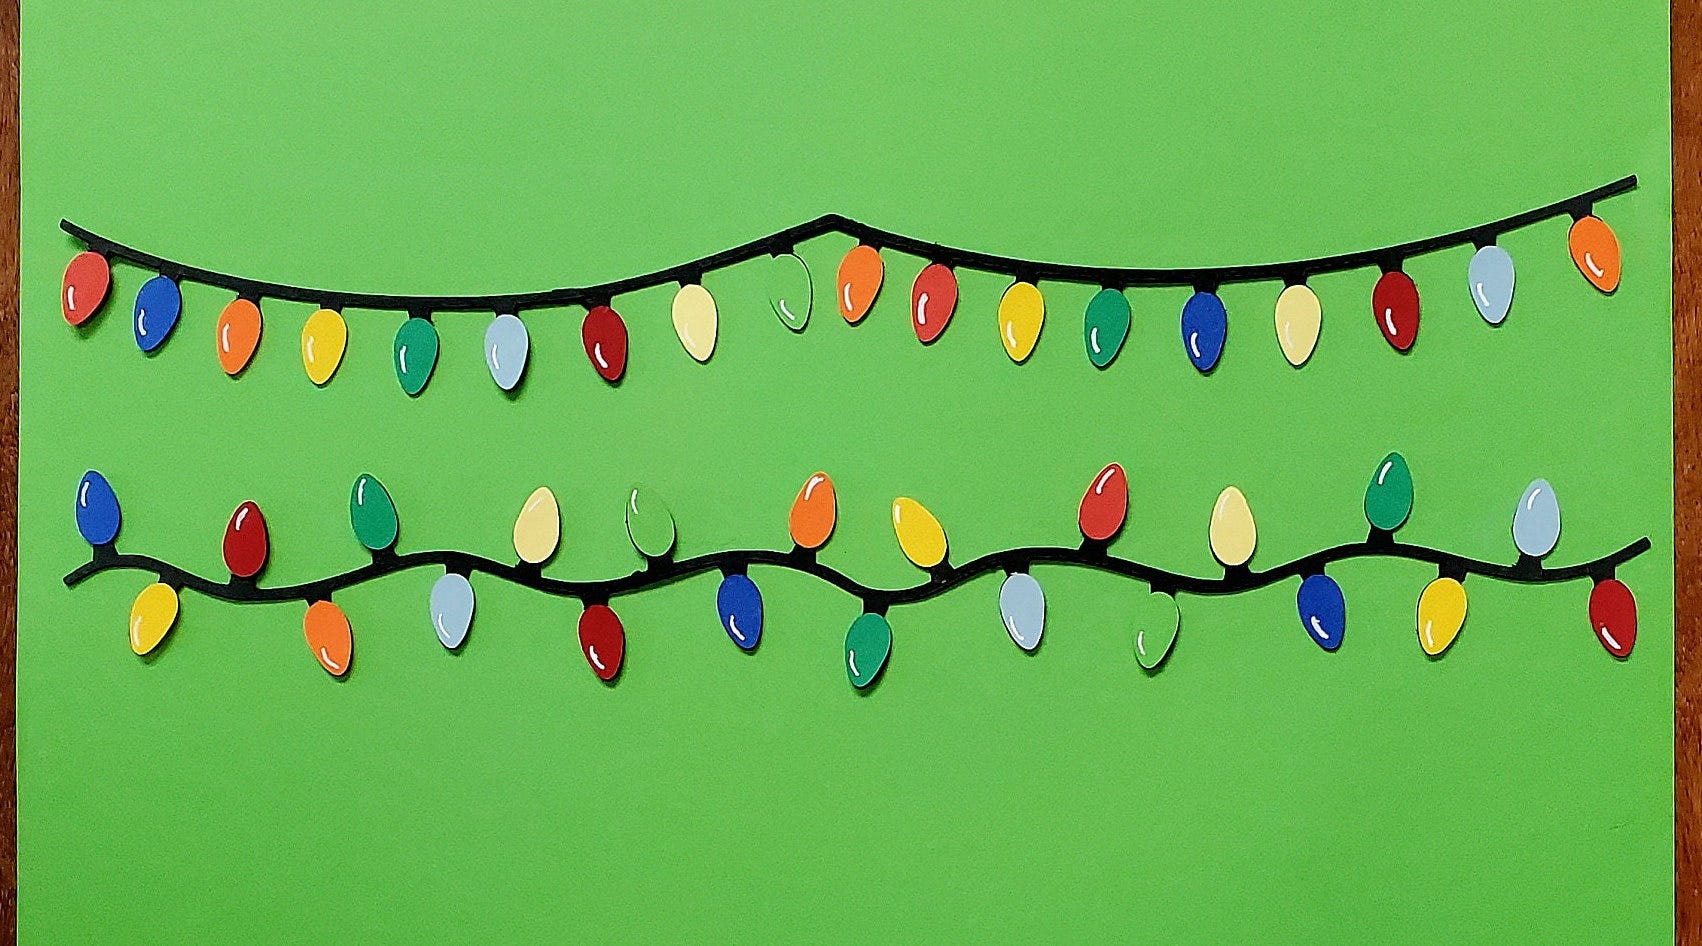 Christmas Lights for card or scrapbook layout die cut embellishment